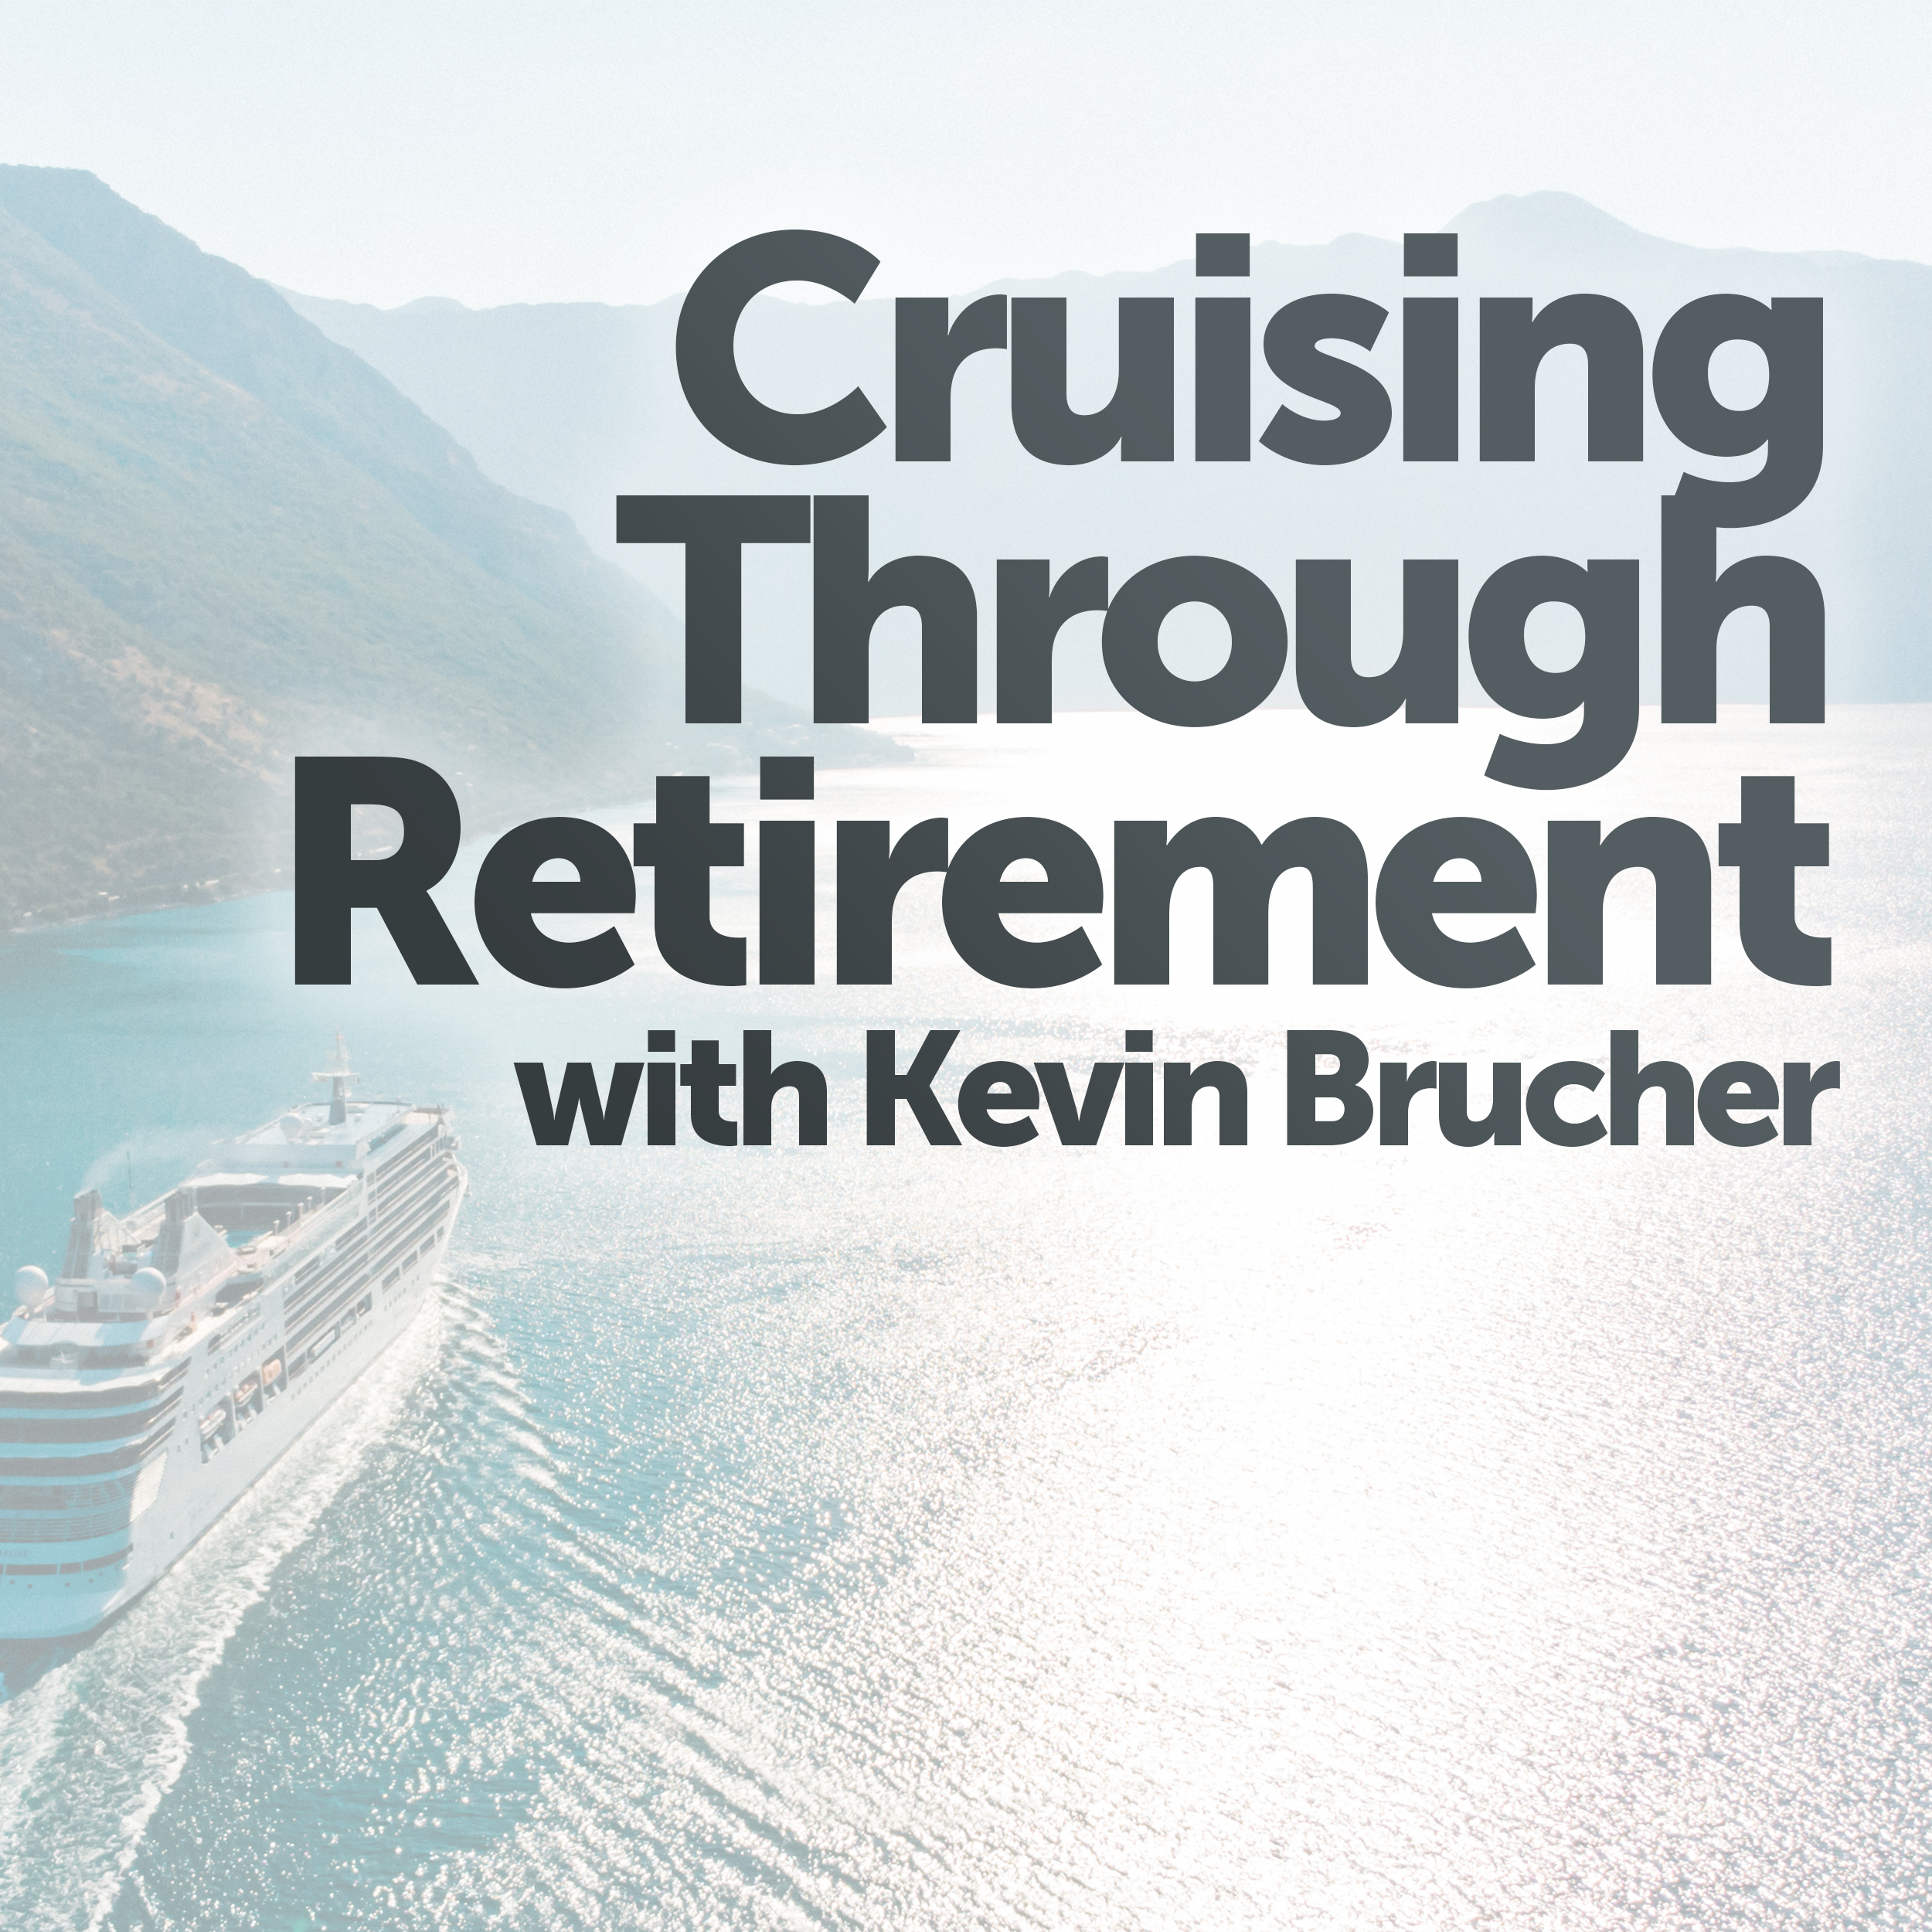 Cruising Through Retirement How will the Fed raising interest rates affect your retirement? Kevin Brucher takes a deep dive to find out.